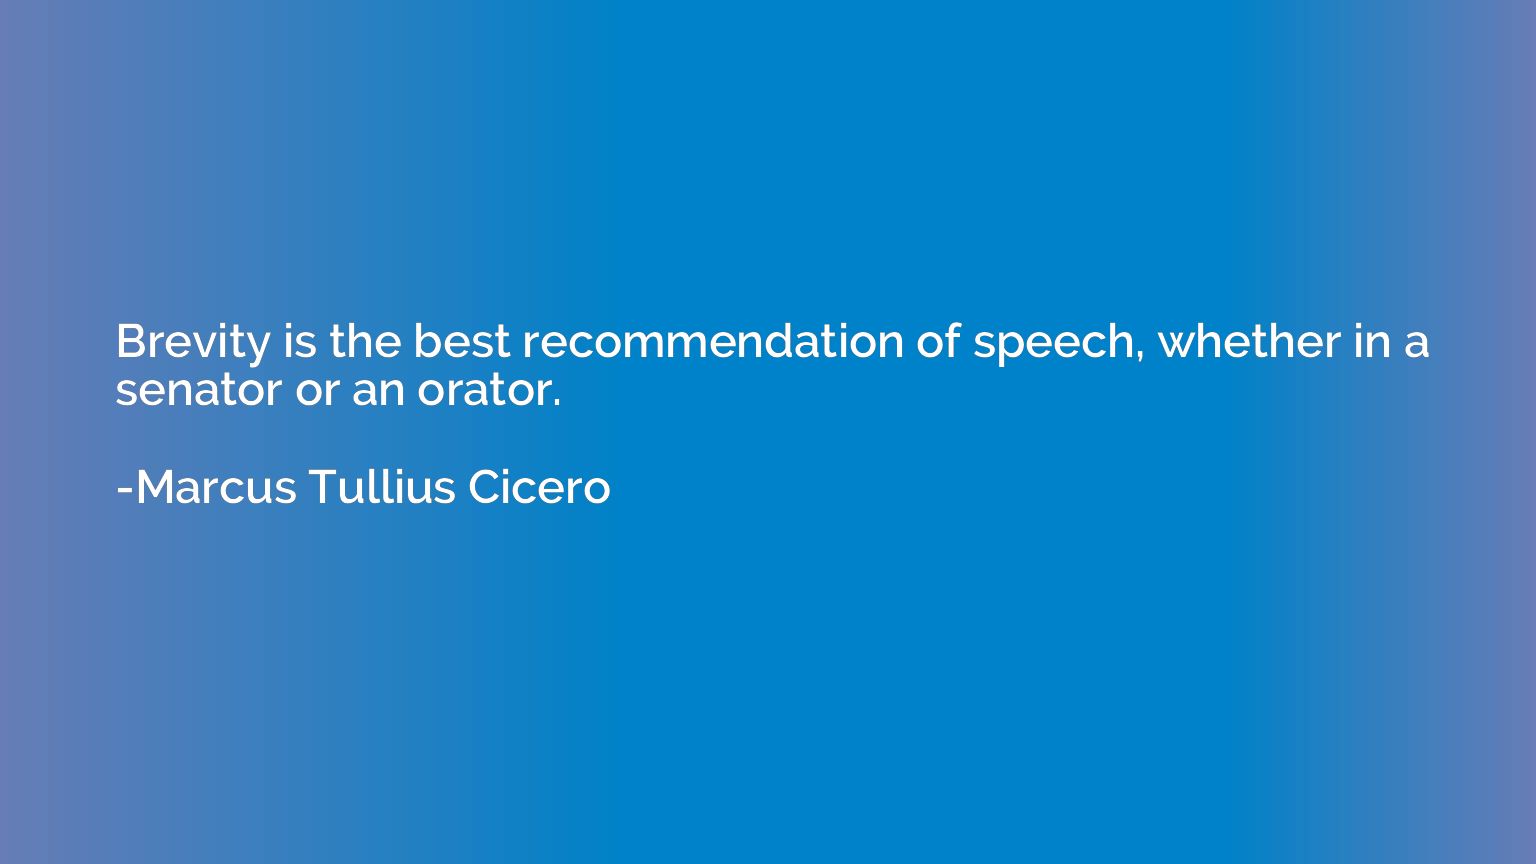 Brevity is the best recommendation of speech, whether in a s